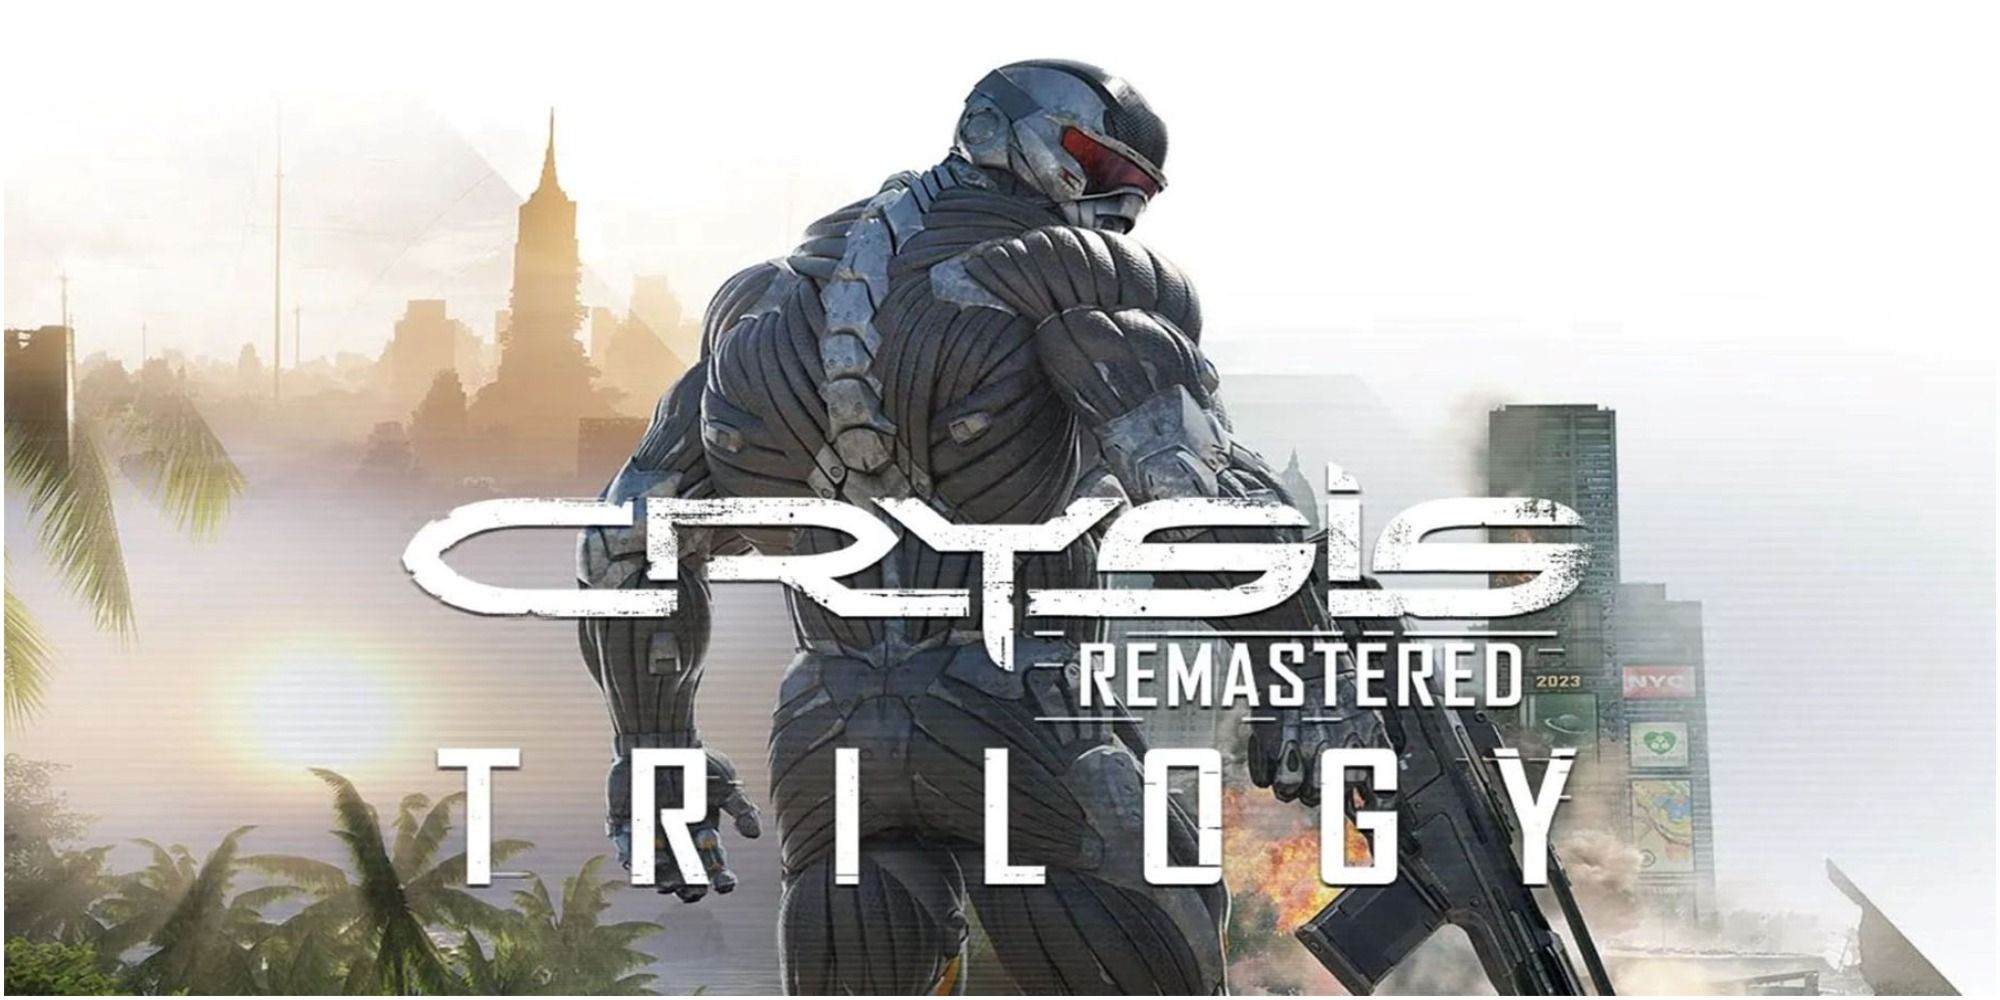 Prophet Crysis Remastered Trilogy Cover